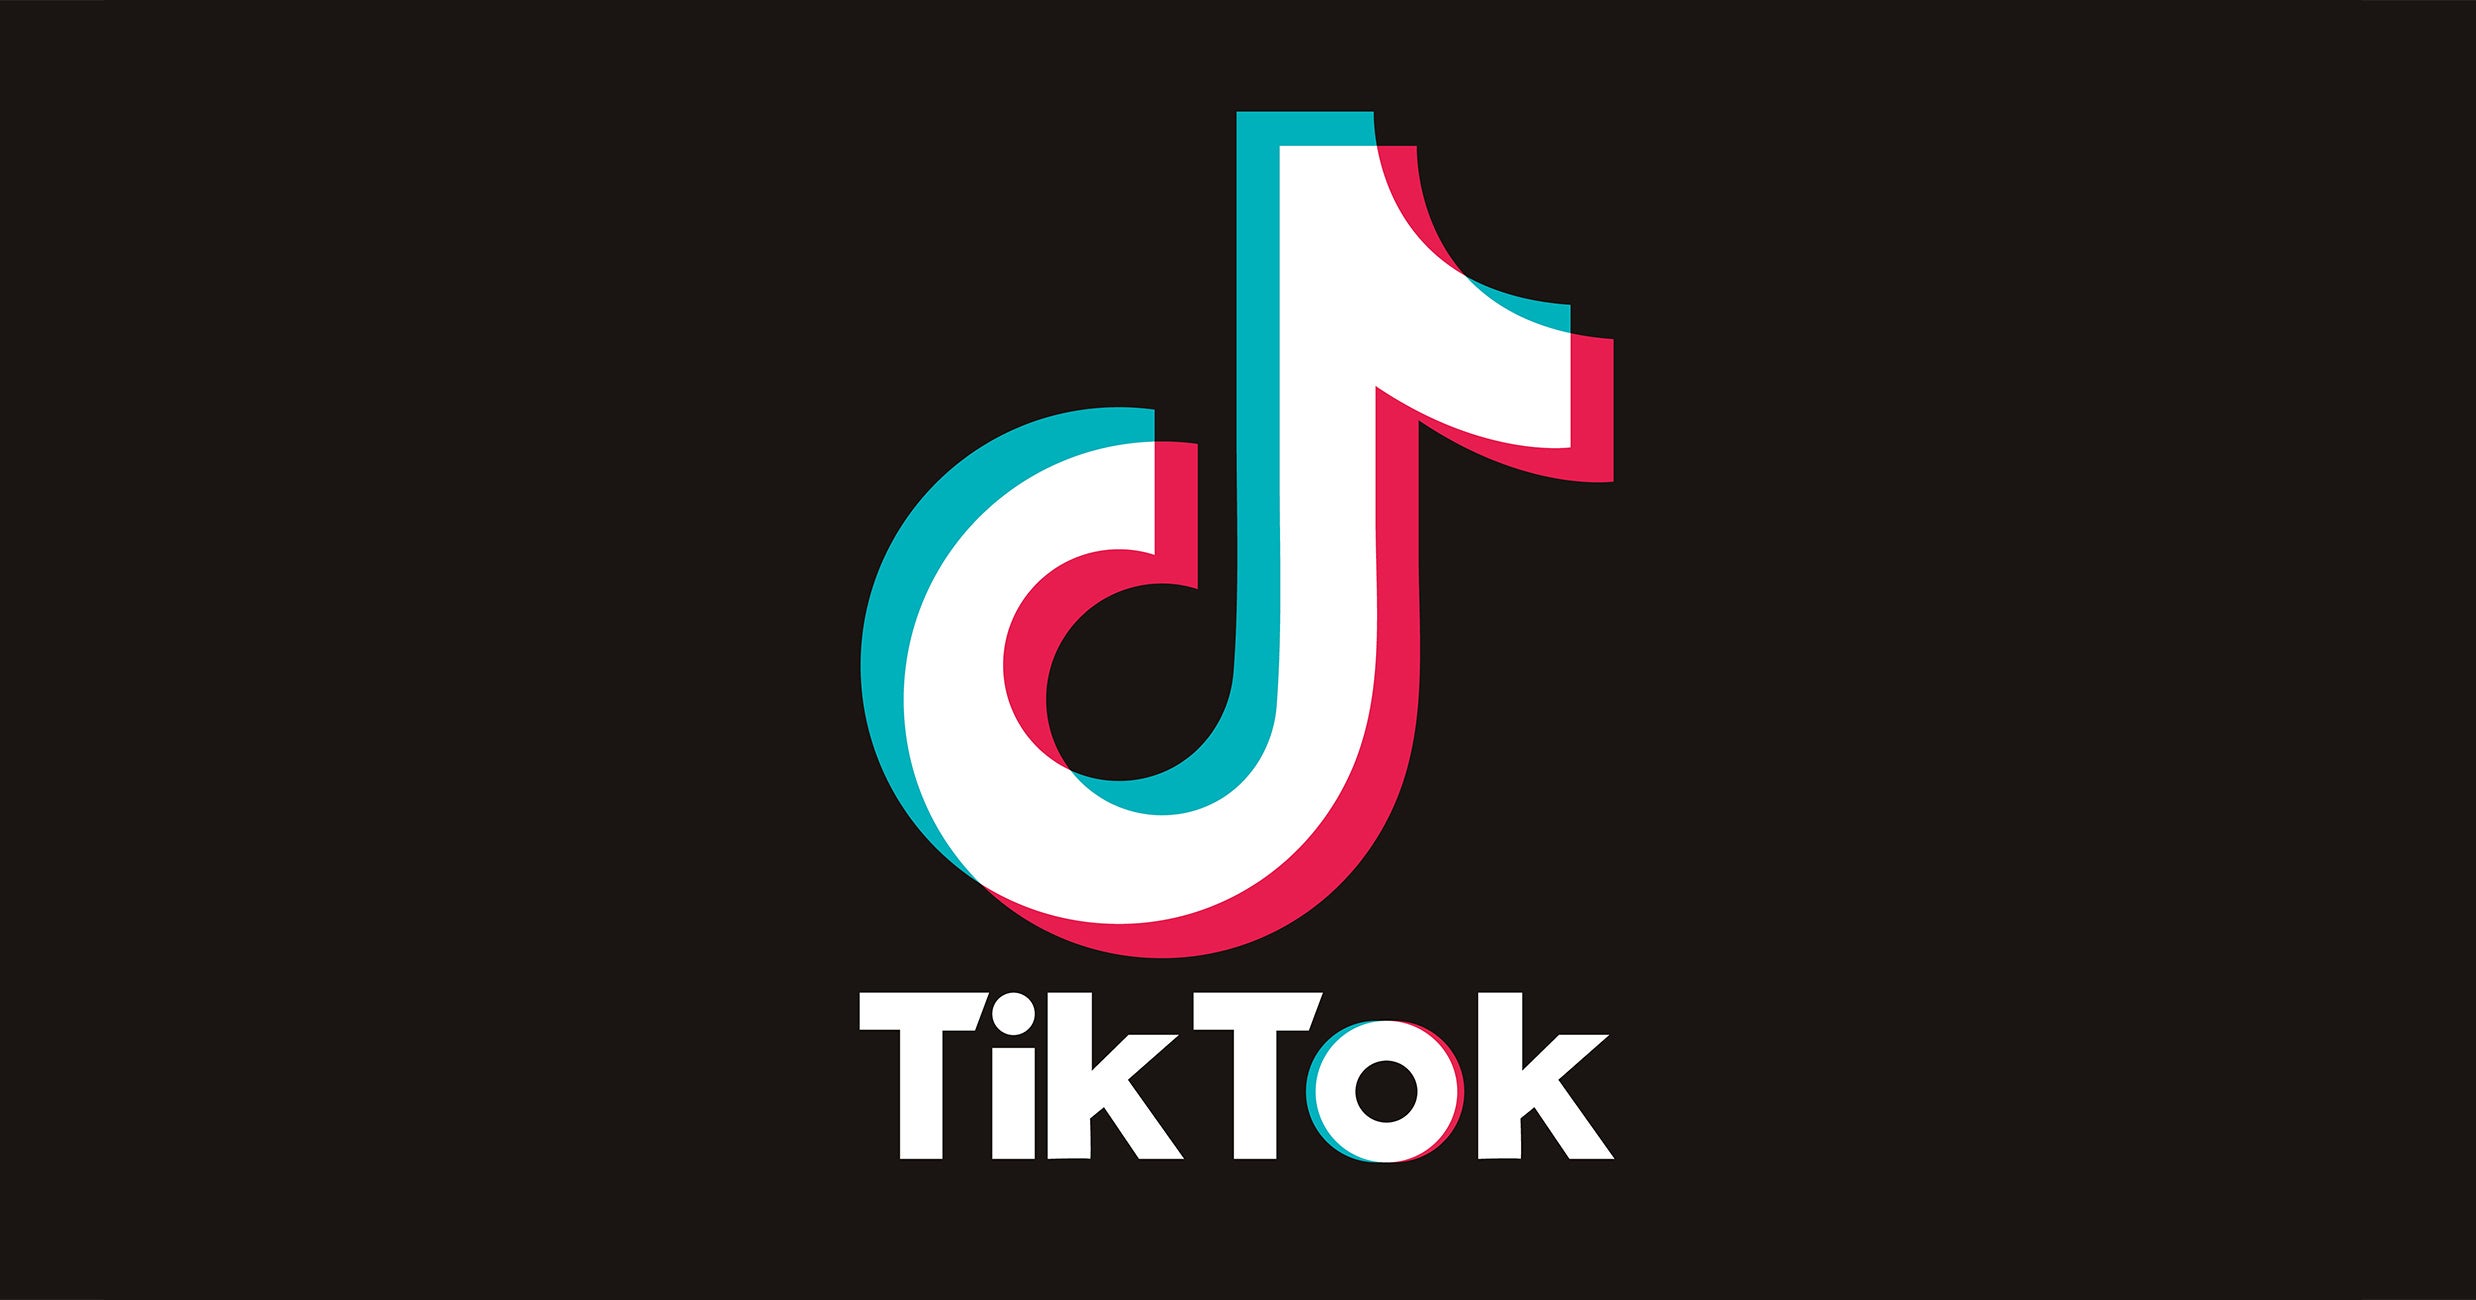 The Real Reason TikTok Changed Its Text To Speech Voice